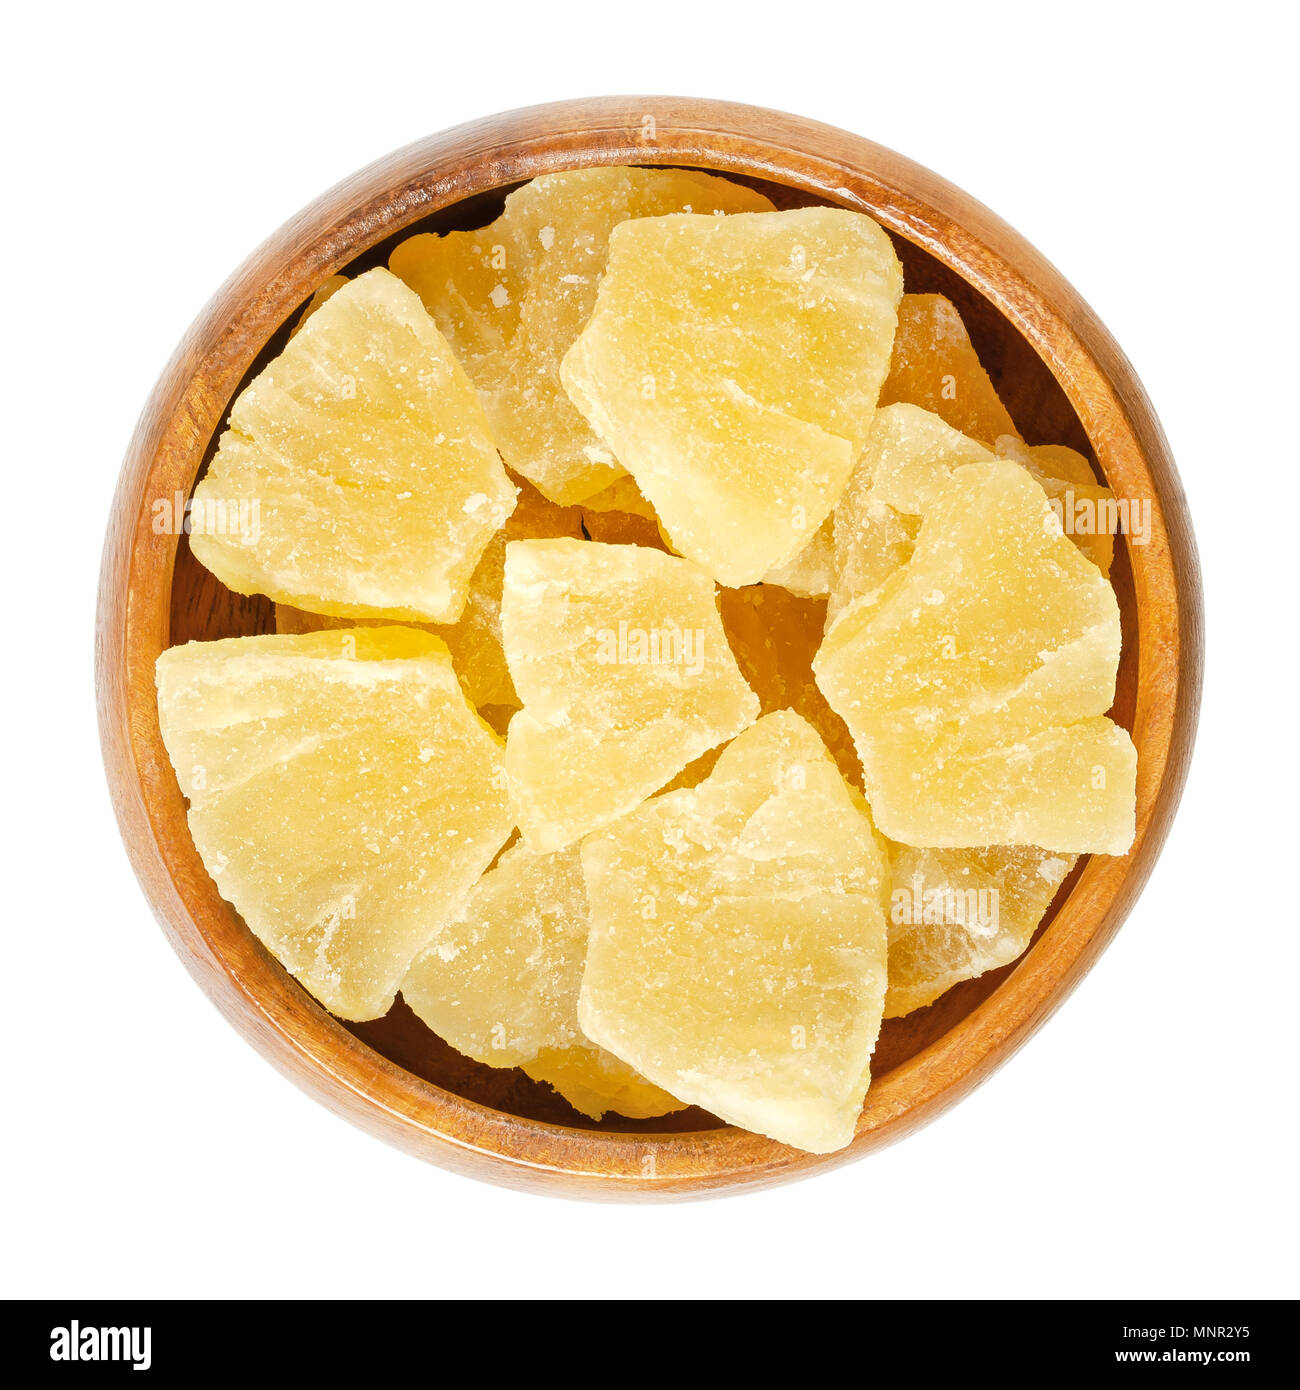 Candied pineapple pieces in wooden bowl. Crystallized chunks of Ananas comosus. Yellow colored flesh of the fruit preserved with sugar. Snack. Stock Photo